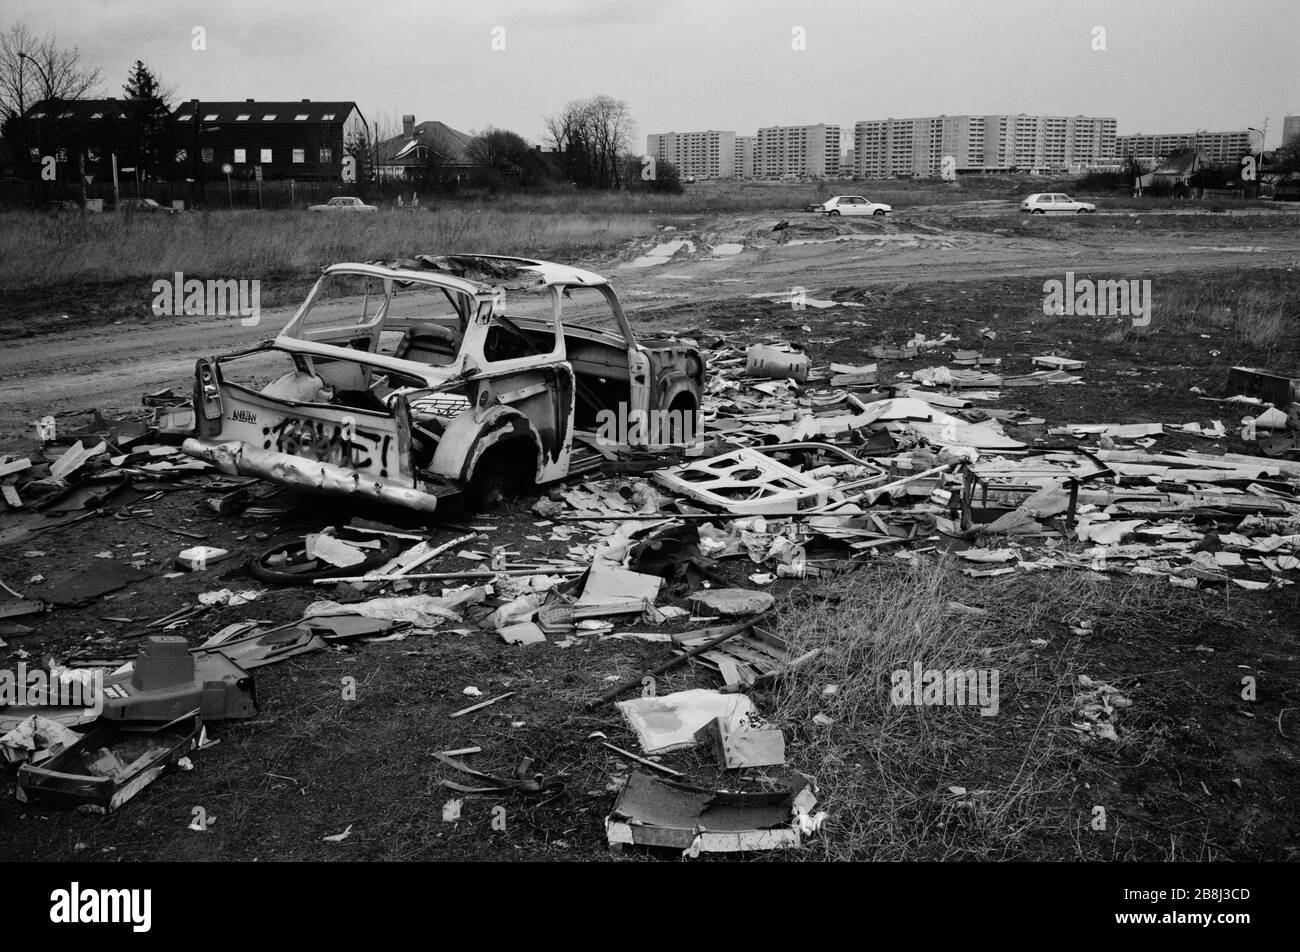 A wrecked shell of an East German Trabant motor car near a section of the course of the former Berlin Wall, Oranienburg, Berlin. The Berlin Wall was a barrier constructed by the German Democratic Republic (GDR, East Germany) starting on 13 August 1961, that completely cut off West Berlin from surrounding East Germany and from East Berlin. The Wall was opened on 9. November 1989 allowing free movement of people from east to west. Stock Photo